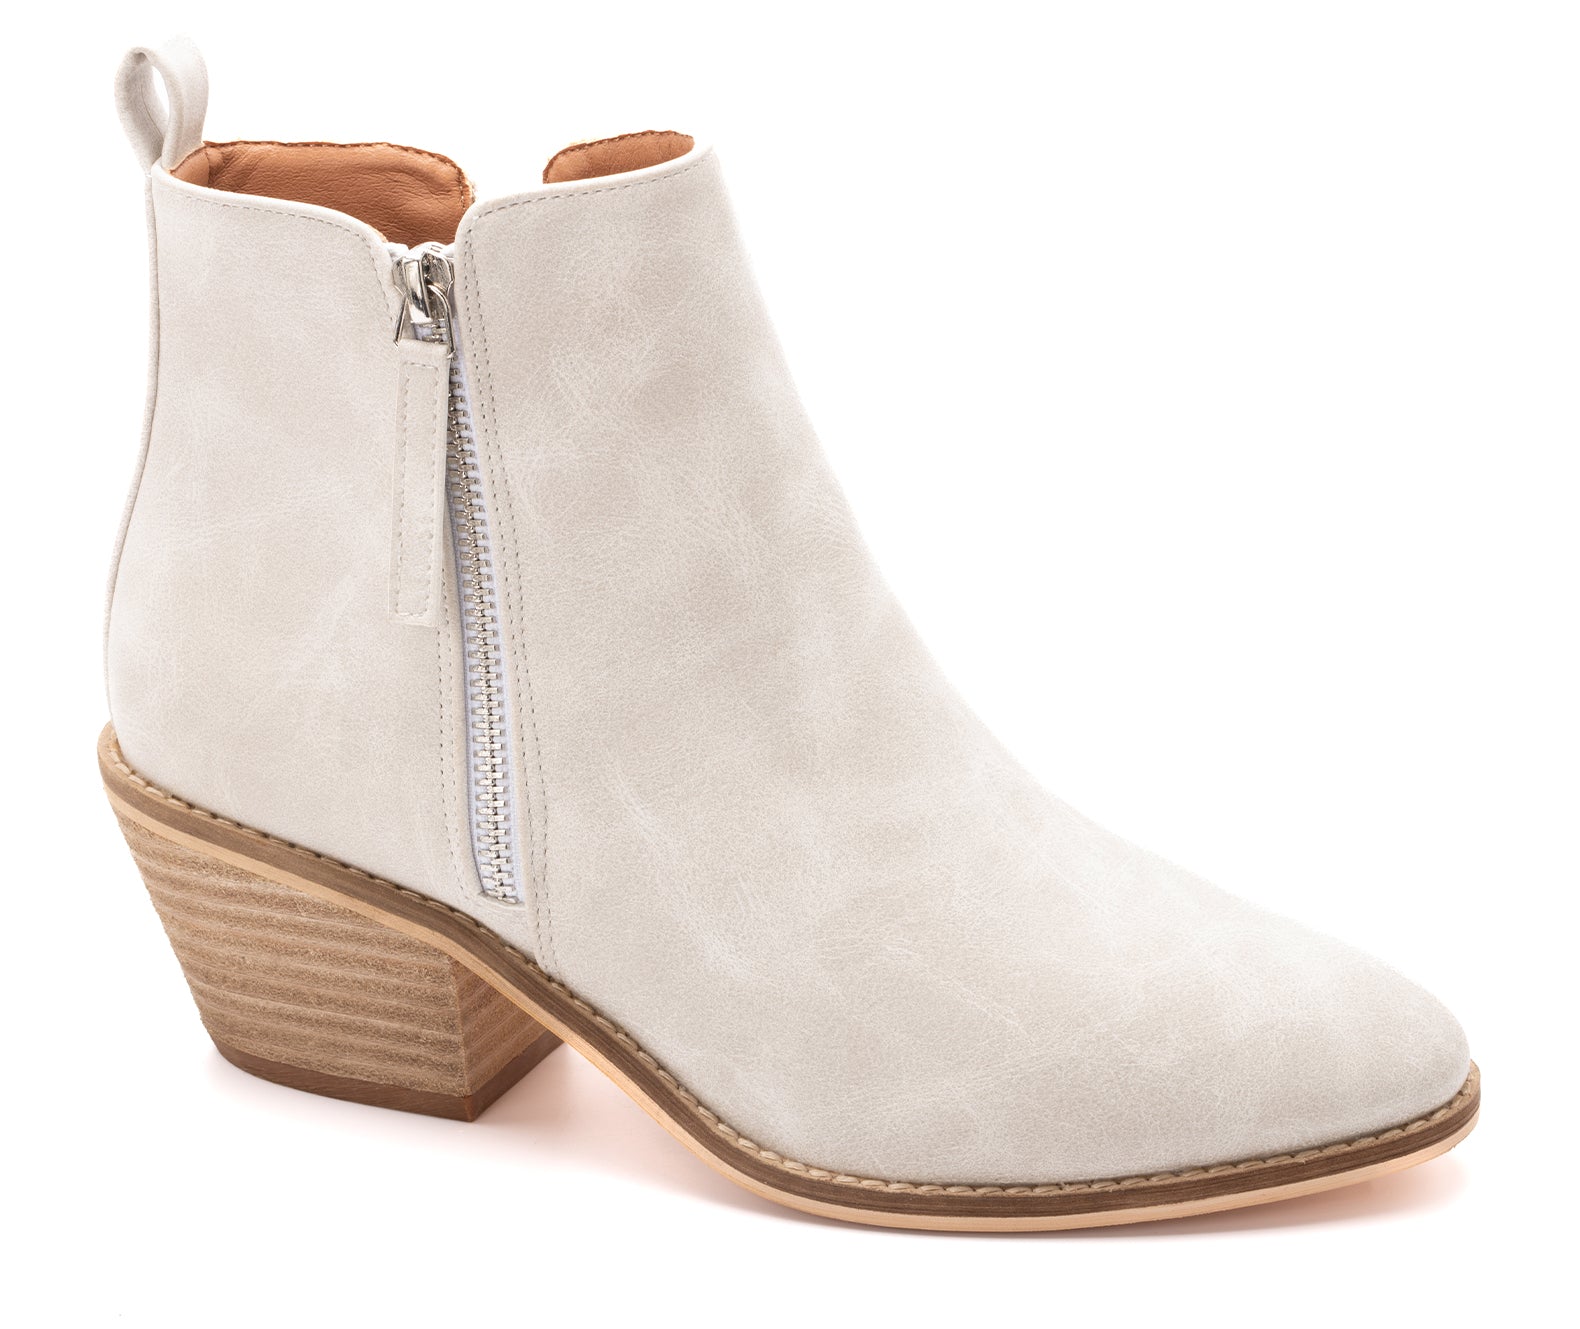 Corky's Spooktacular Booties Ivory Suede